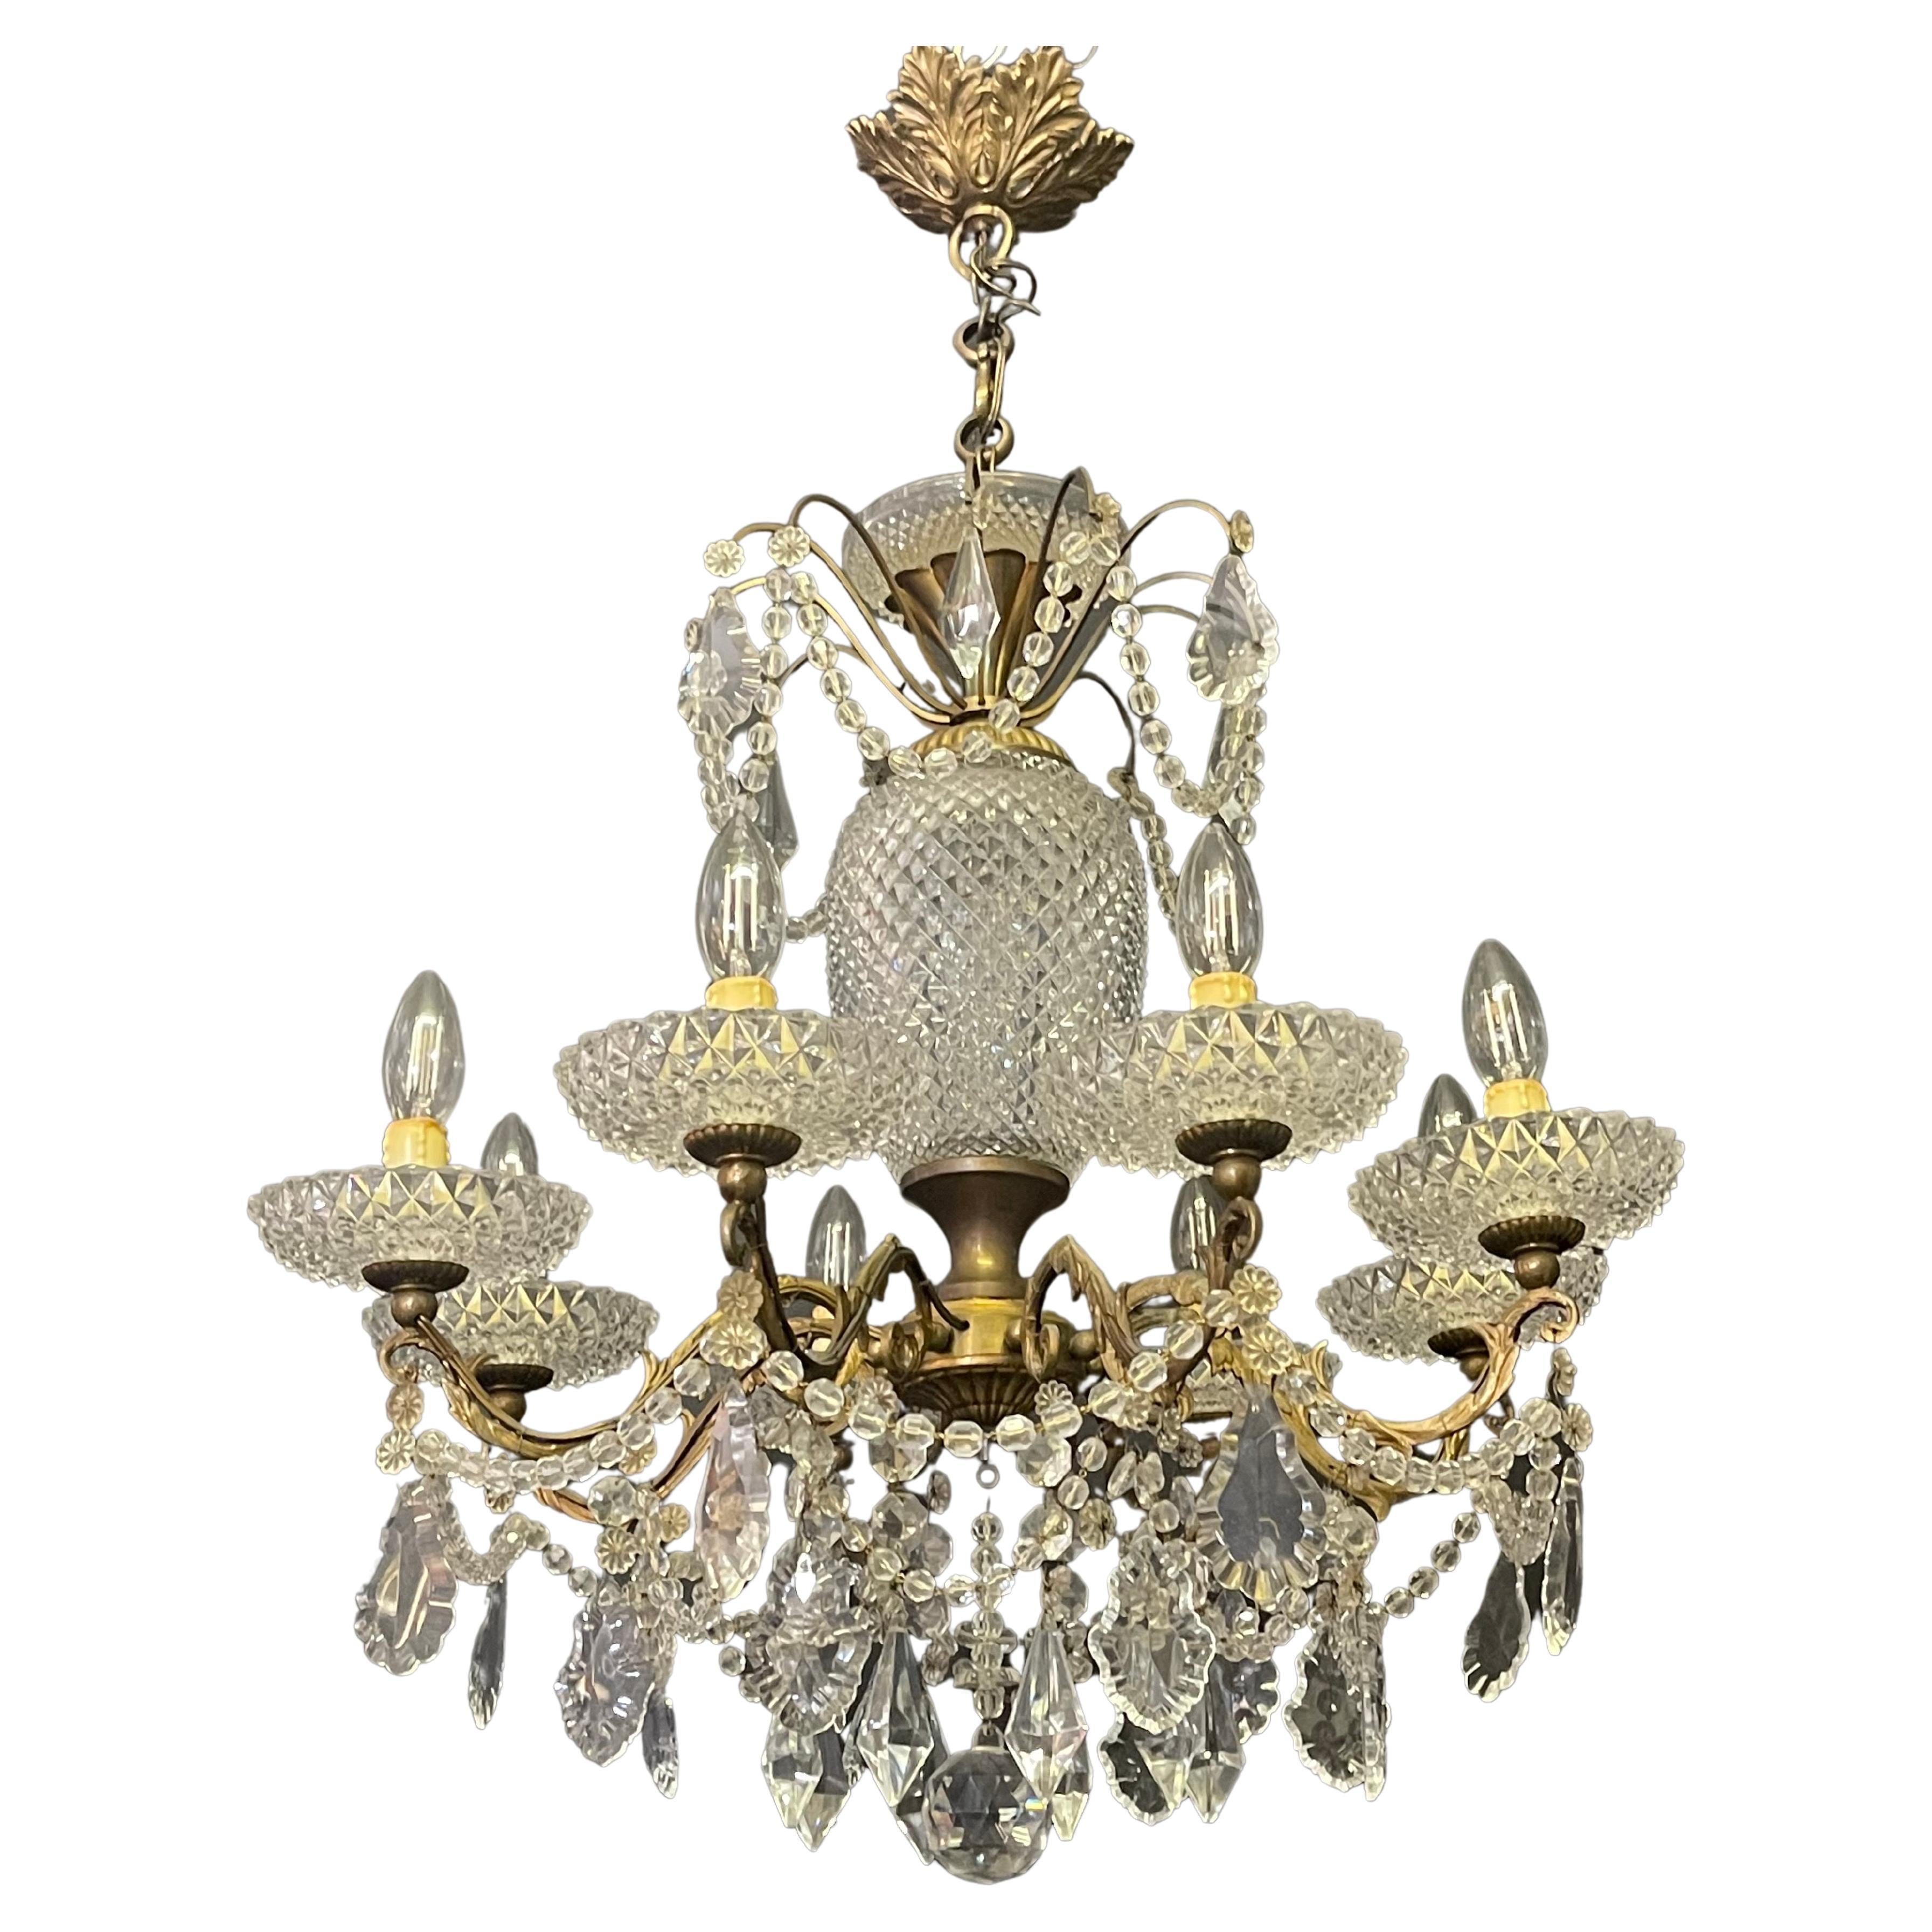 An Art Deco bronze and crystal chandelier, France, circa 1940s.
A wonderful hand-crafted eight-light chandelier decorated with diamond cut crystal and many crystal pendants.
Socket: 8 x e14 for standard screw bulbs.

In an excellent condition.